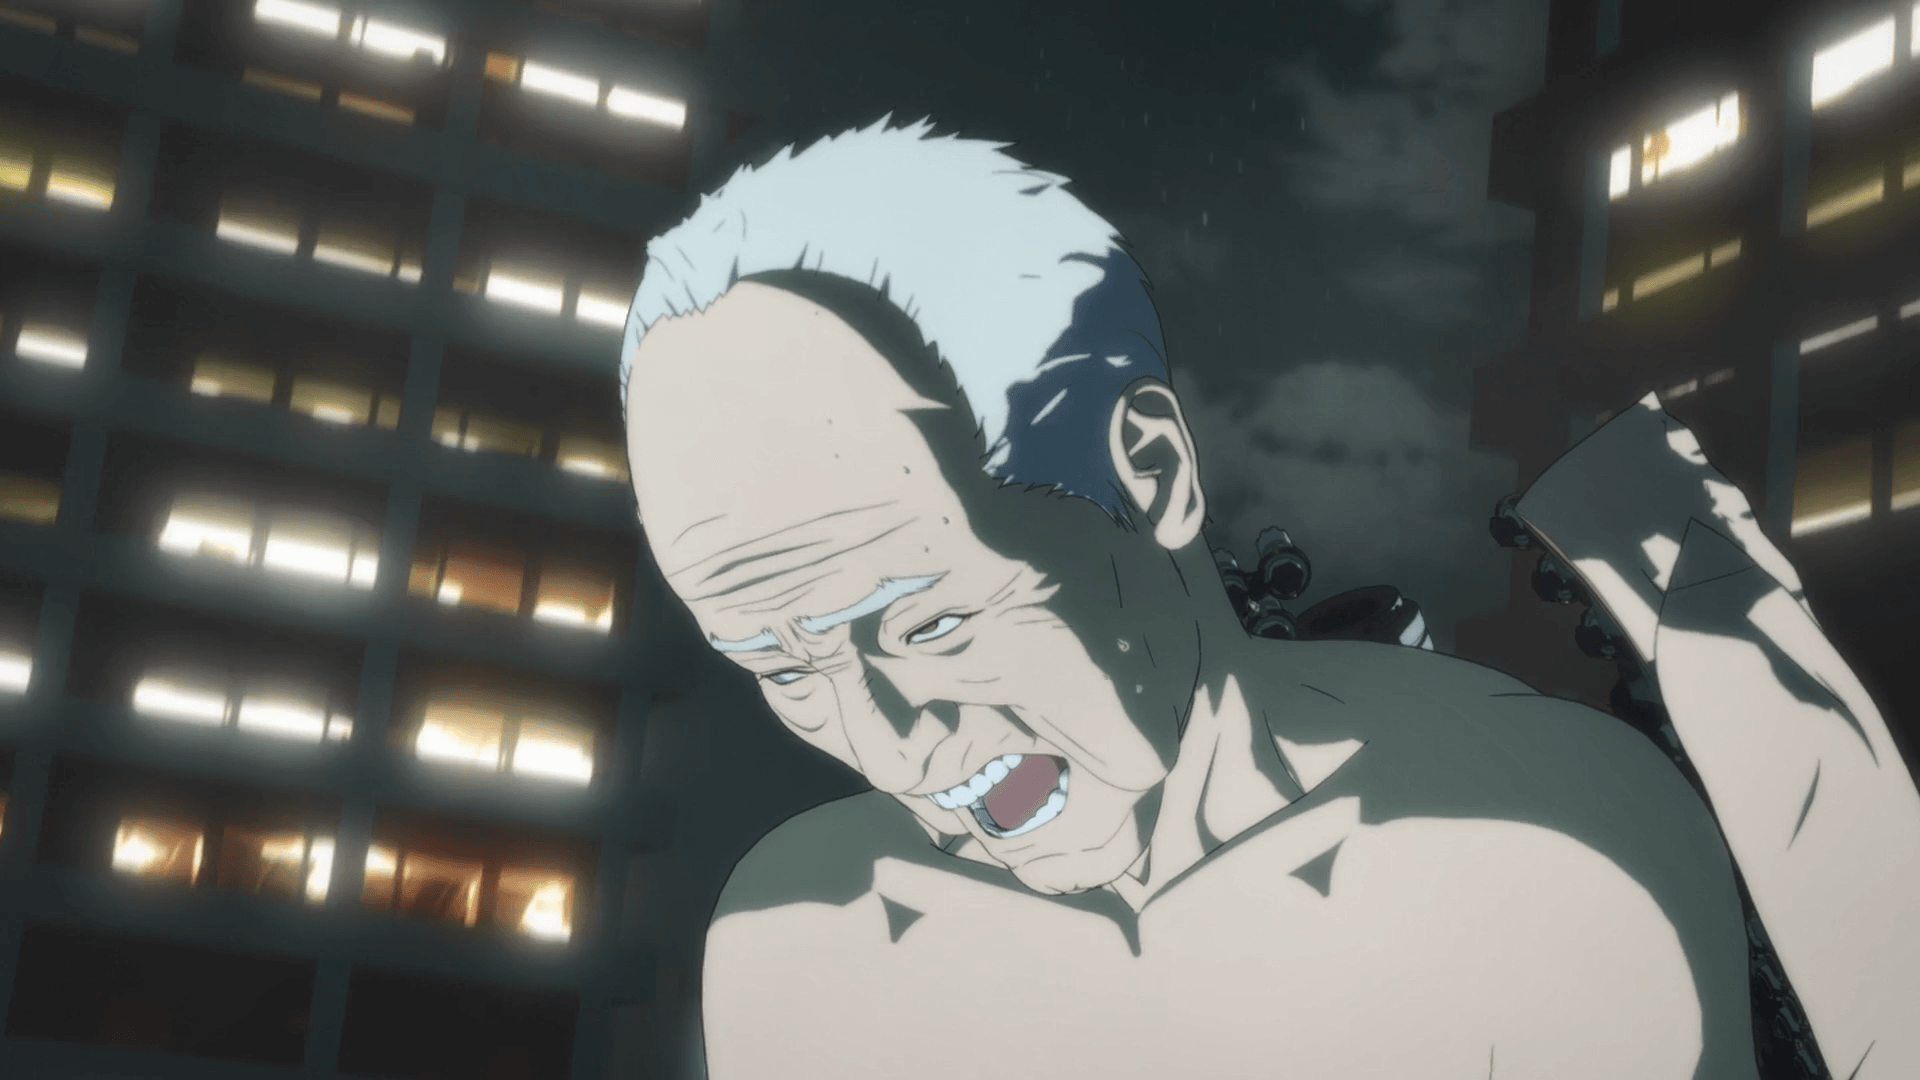 Spoilers Inuyashiki 3 discussion